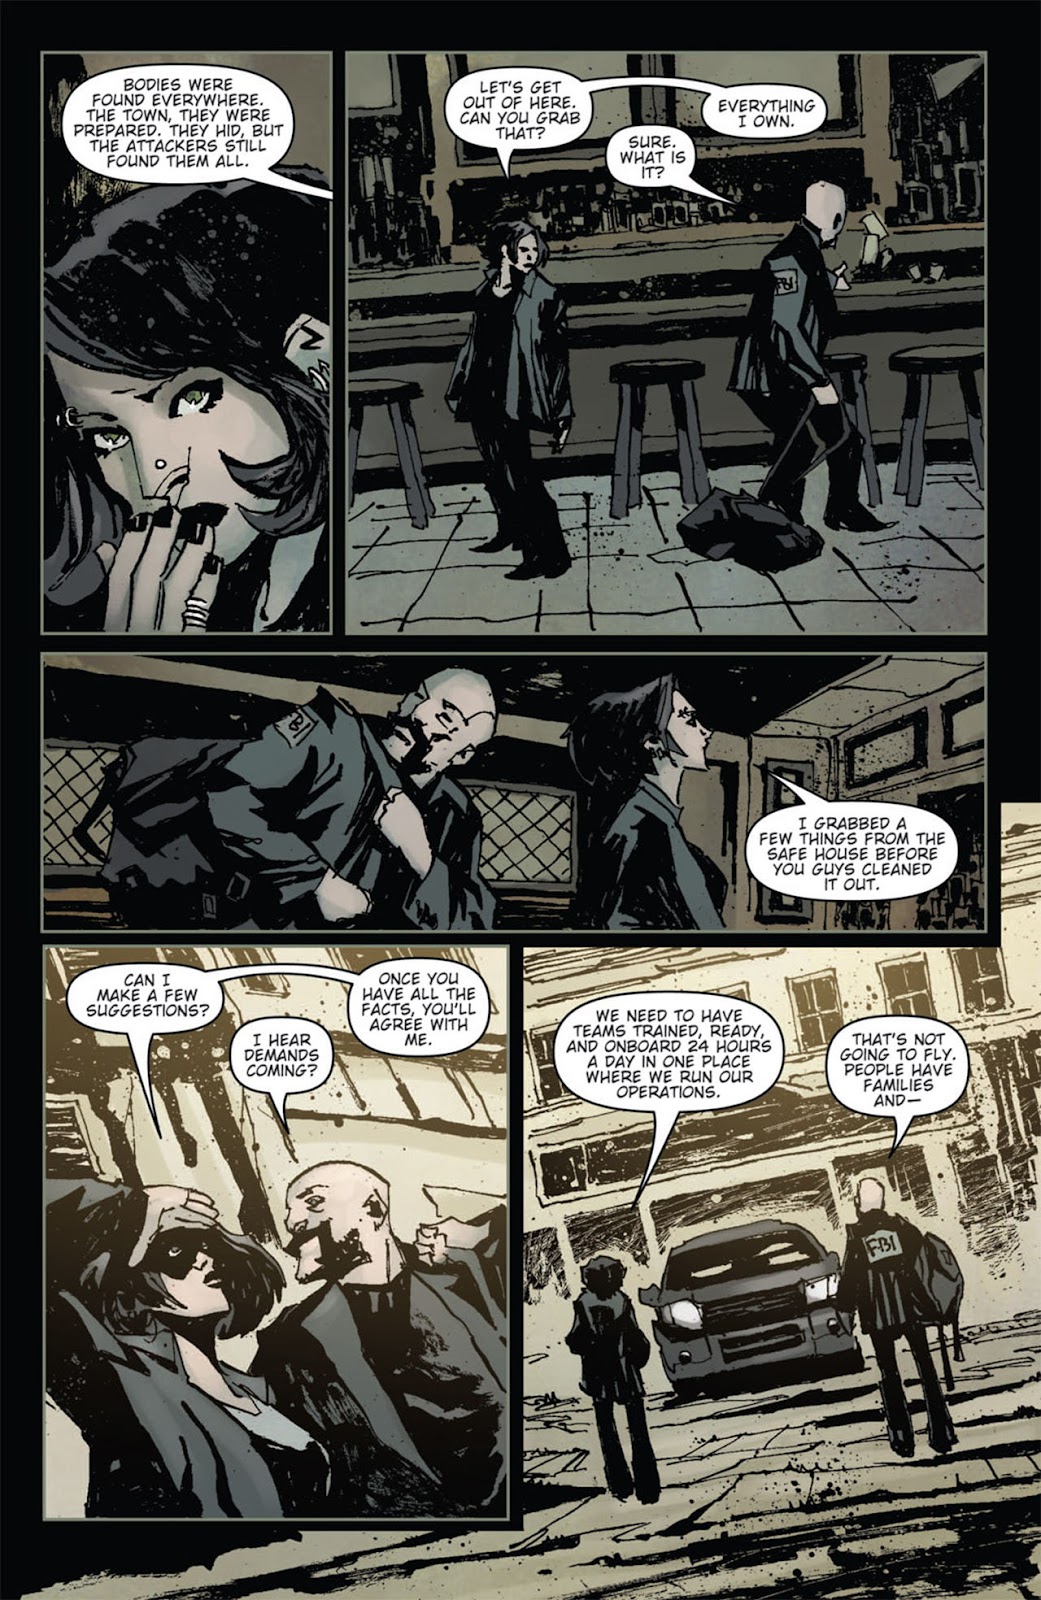 30 Days of Night (2011) issue 7 - Page 7